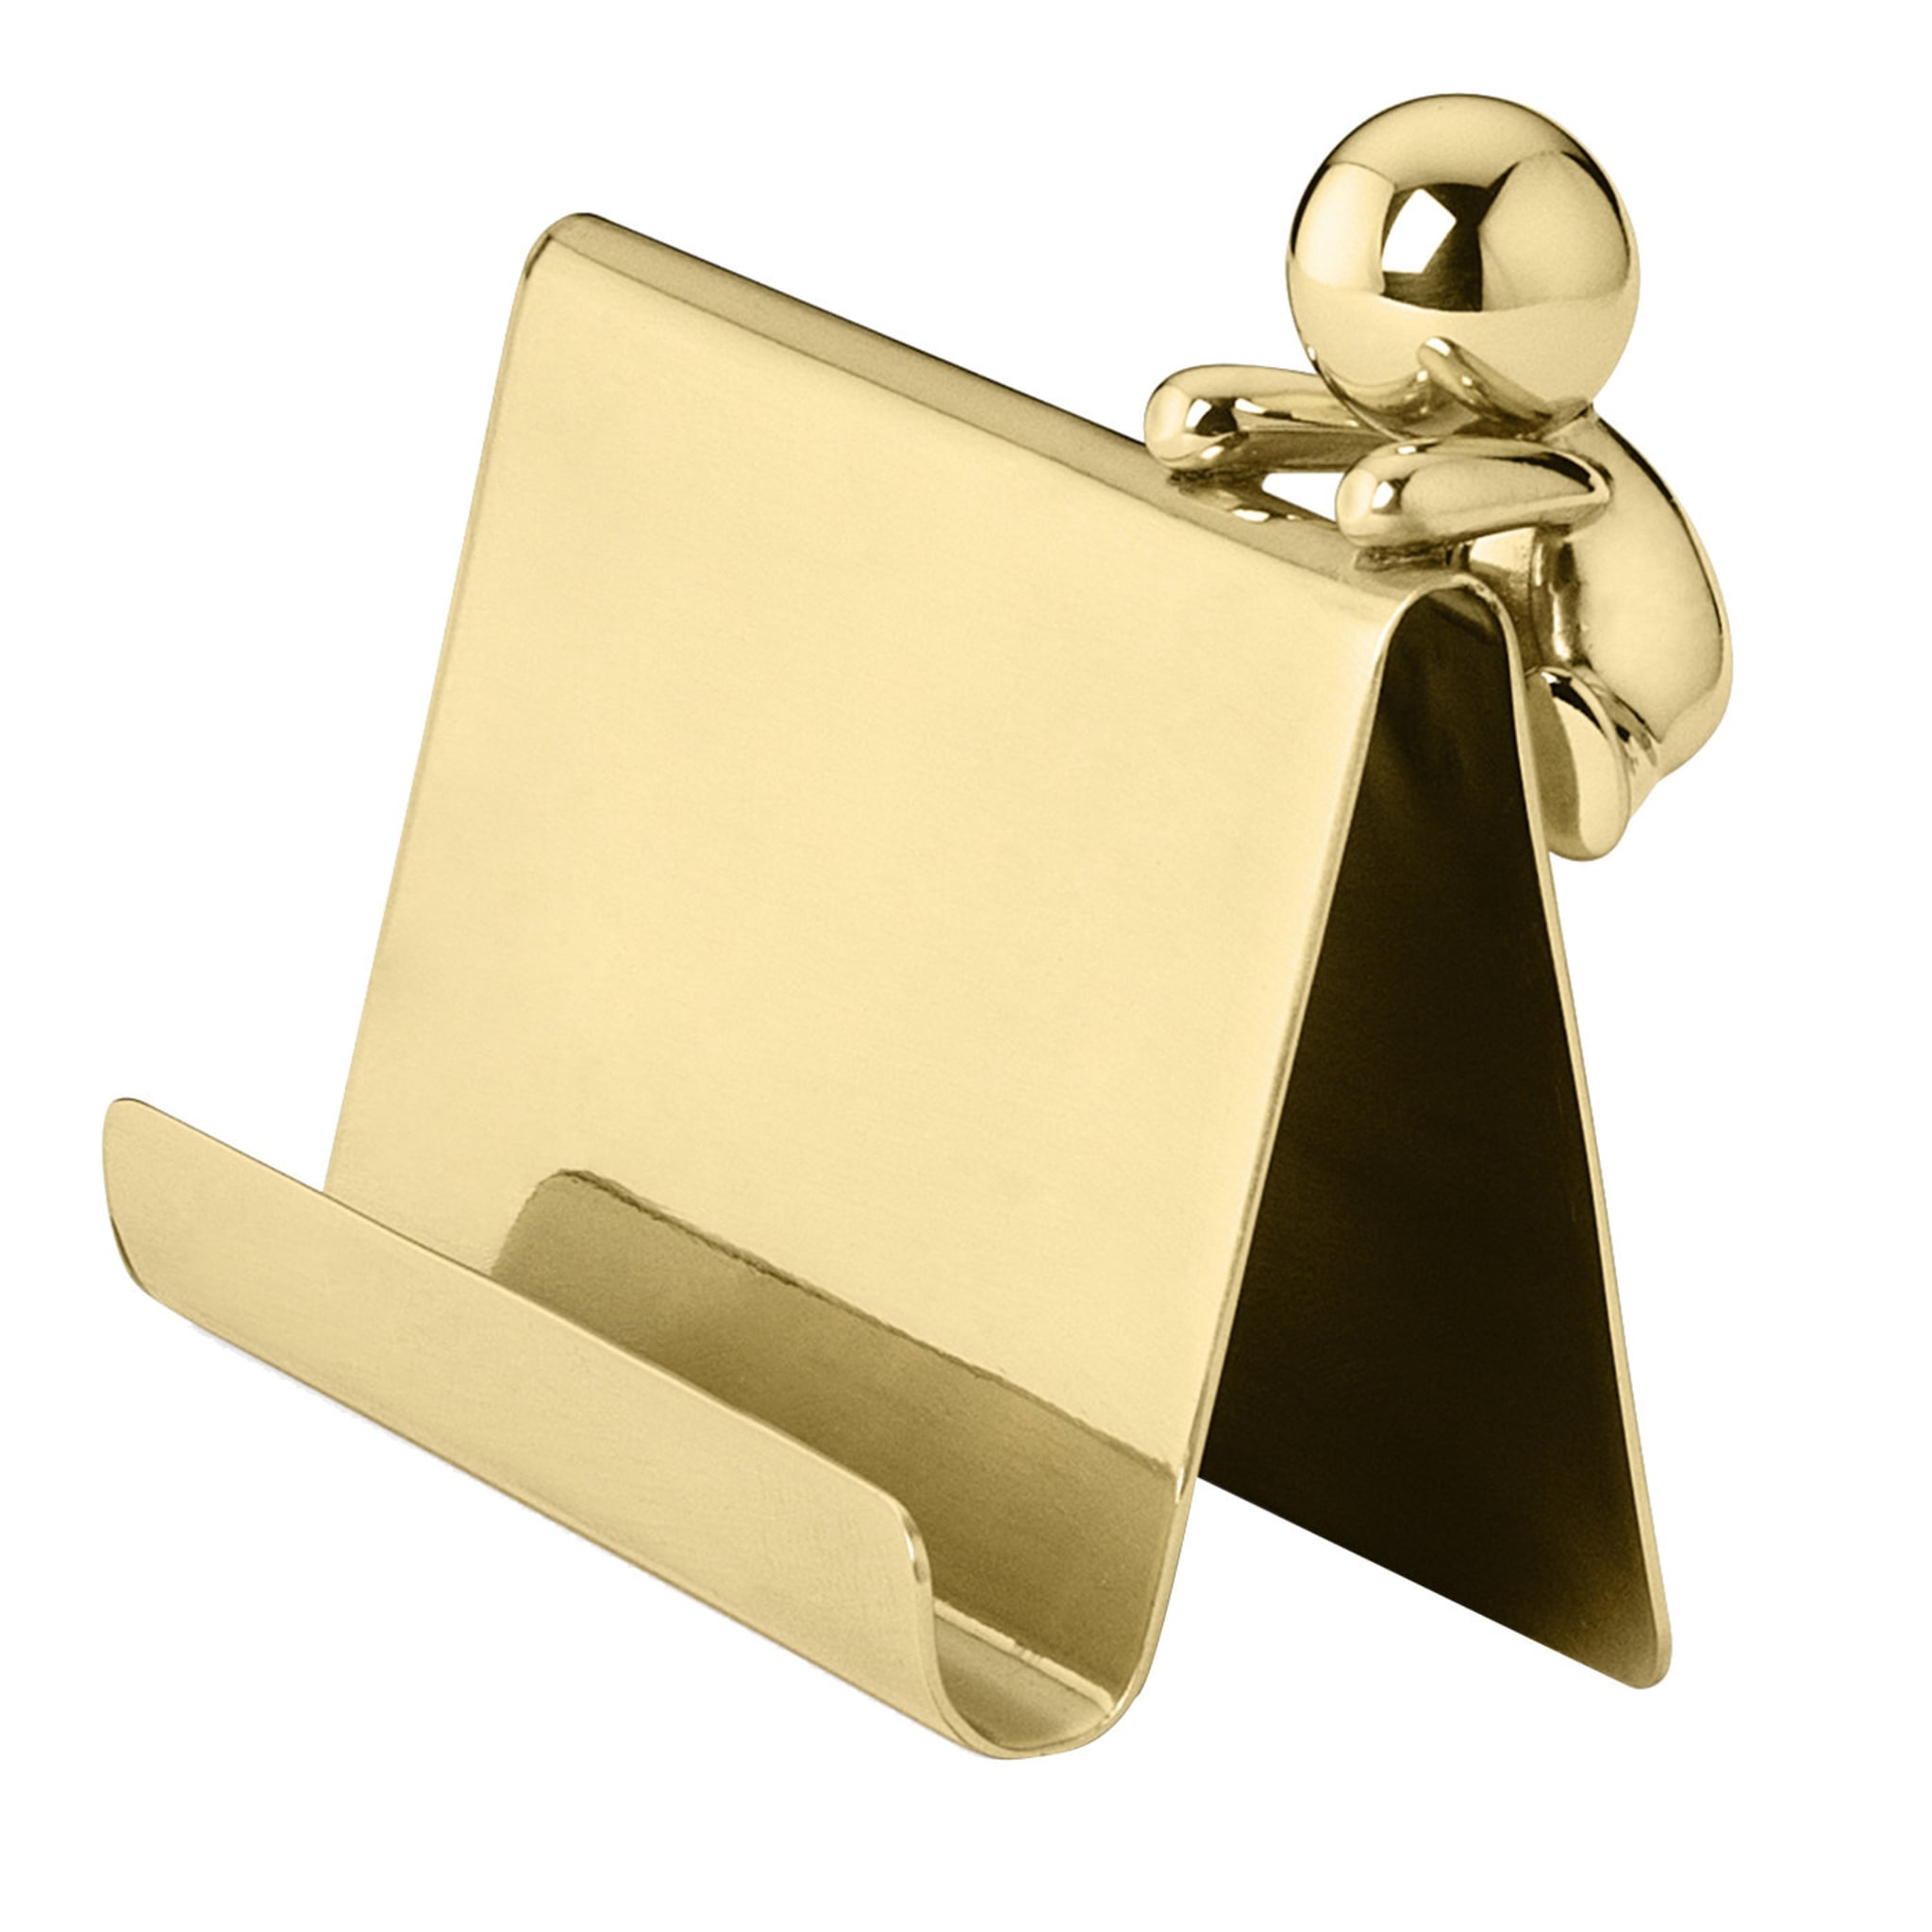 Omini Business Card Holder in Polished Brass By Stefano Giovannoni - Main view